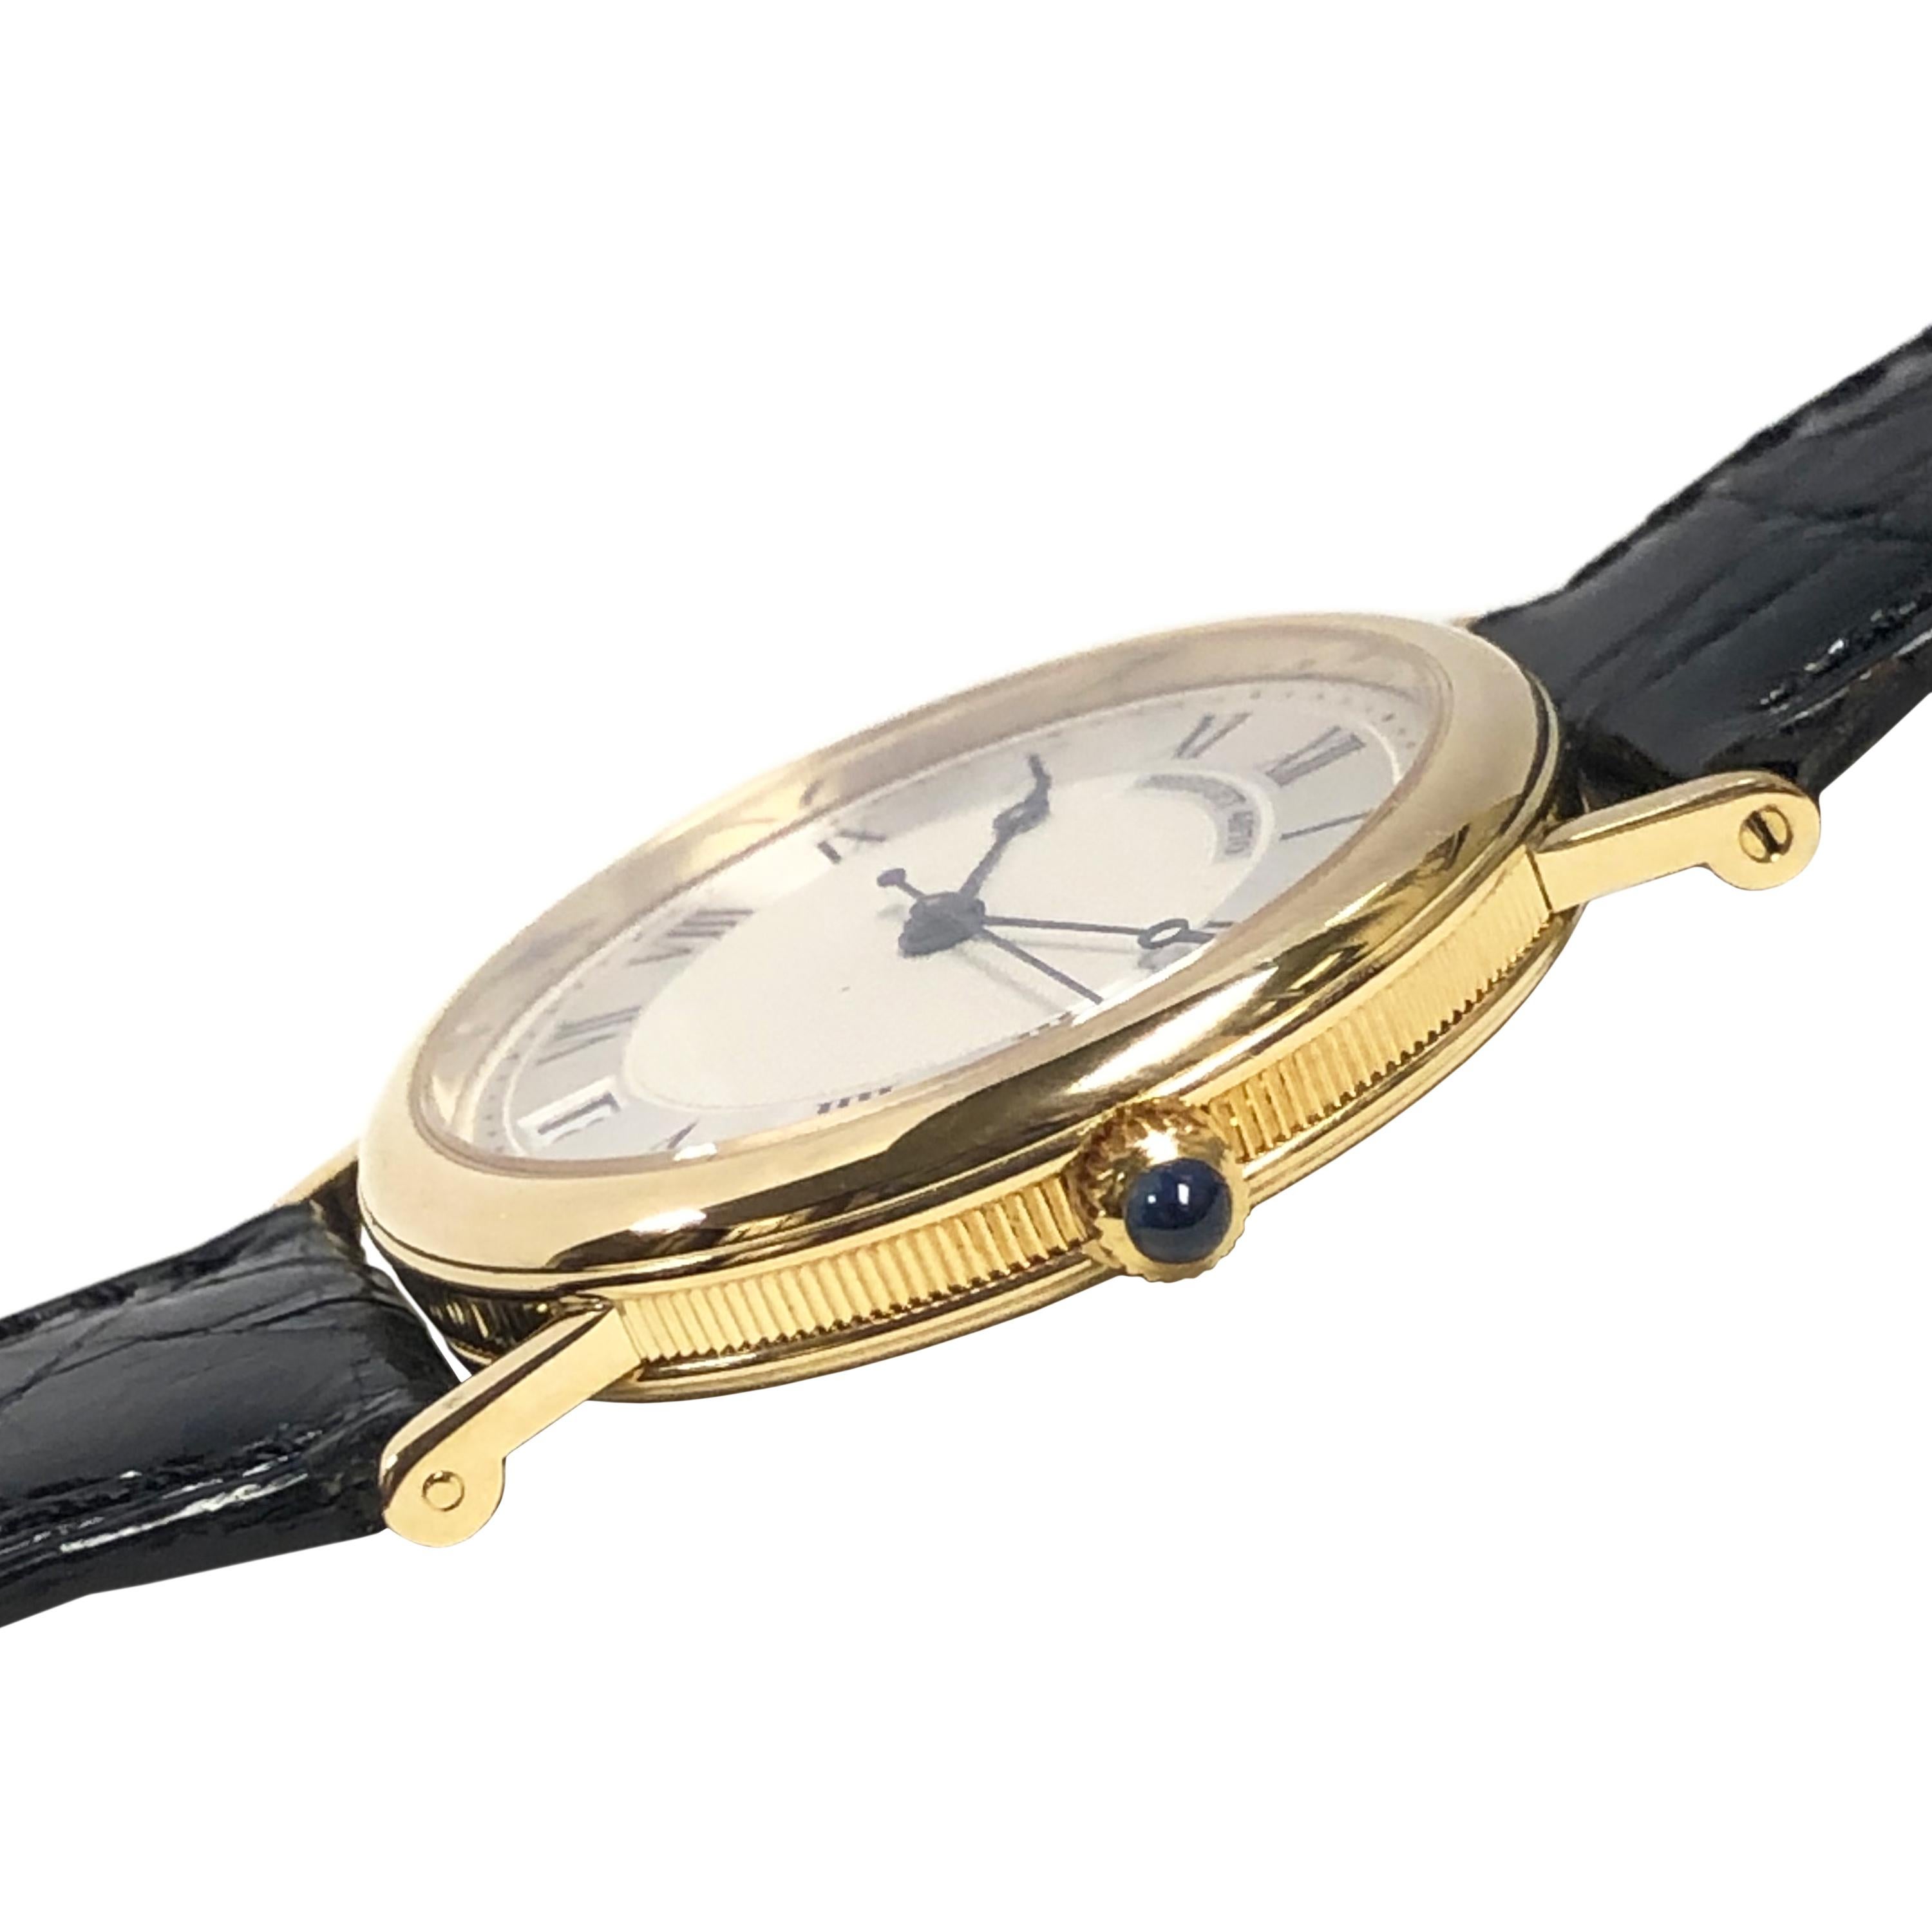 Circa 2000 Breguet Reference 3325 Wrist watch, 32.5 M.M. Diameter 18K Yellow Gold 3 piece case with Coin Edge. Sapphire Crown, Automatic, self winding movement, Silver Dial with White Textured waffle center, Black Roman numerals, Calendar window at